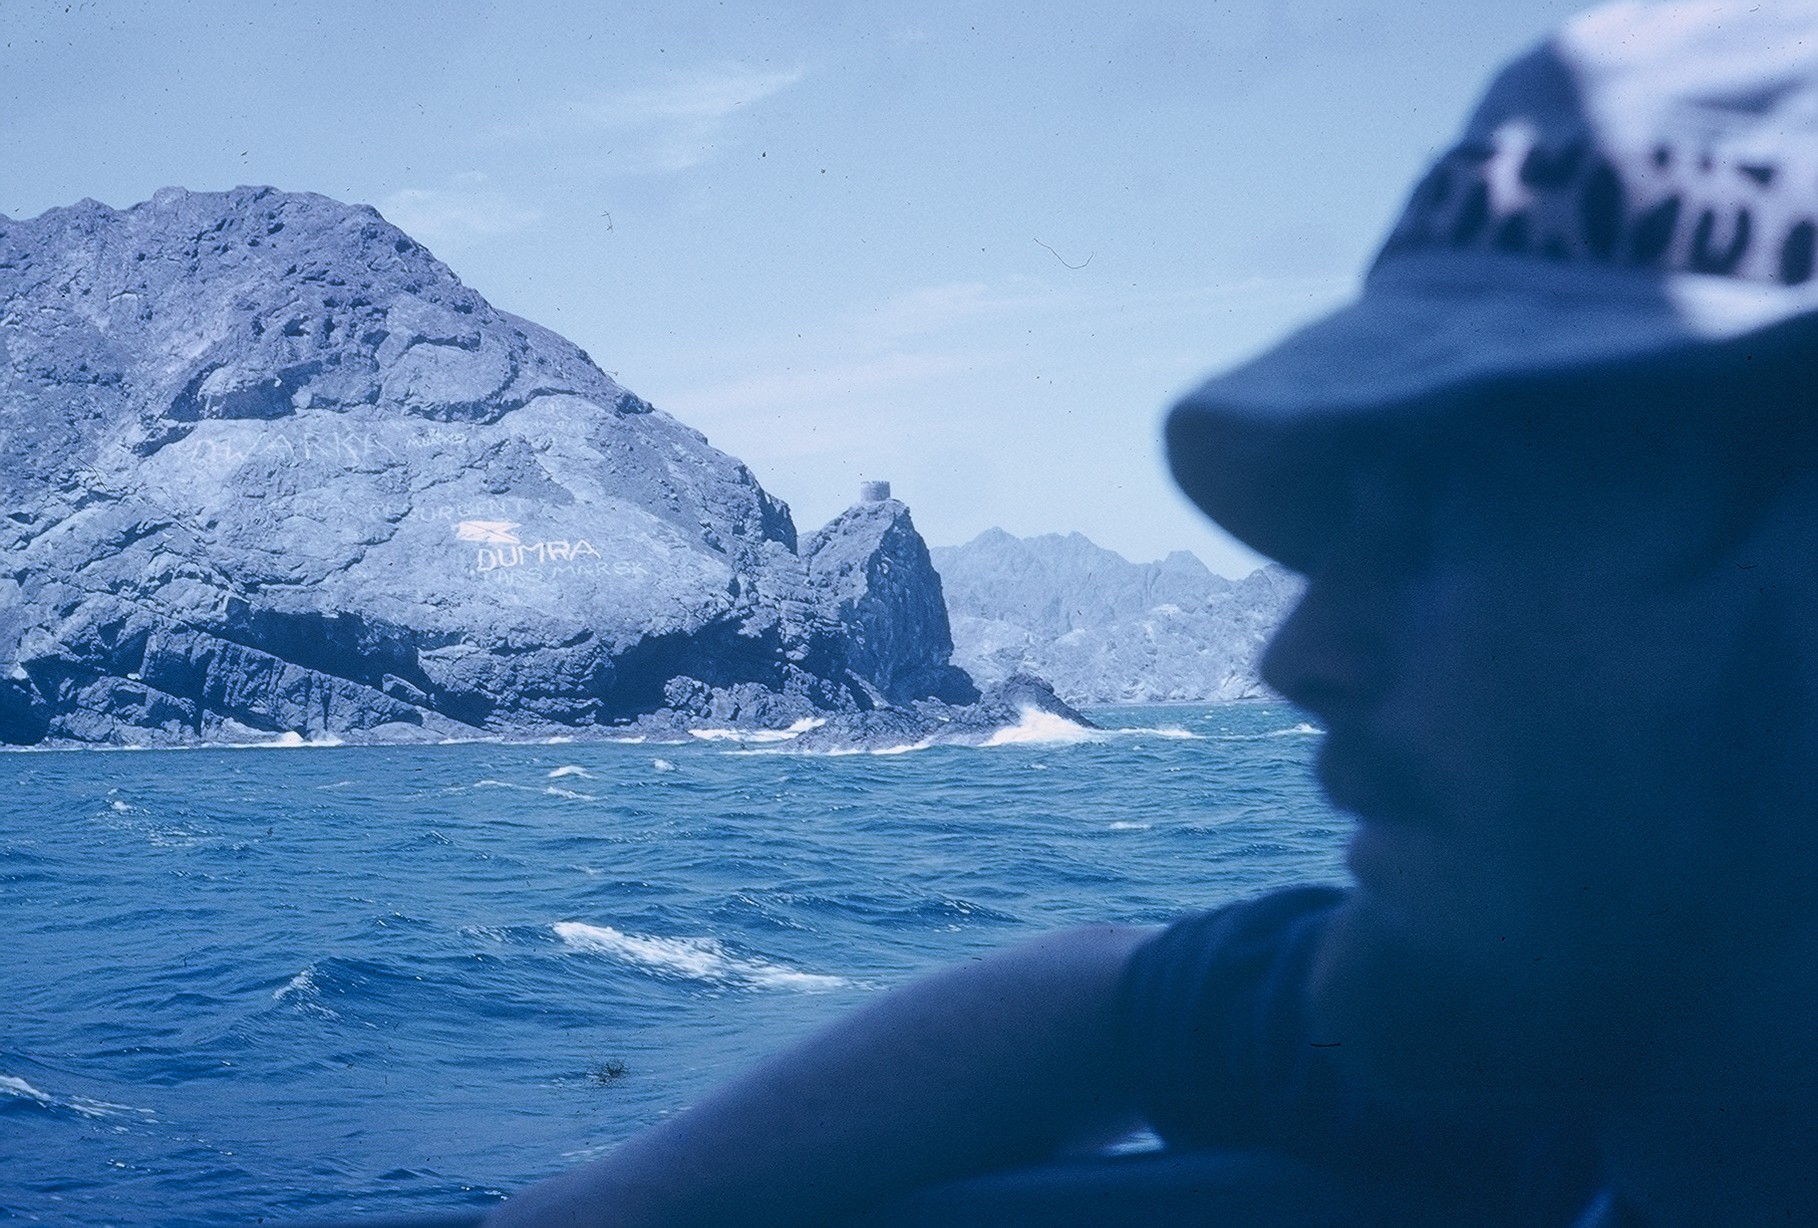 1974 - Gus with Cuba in Background